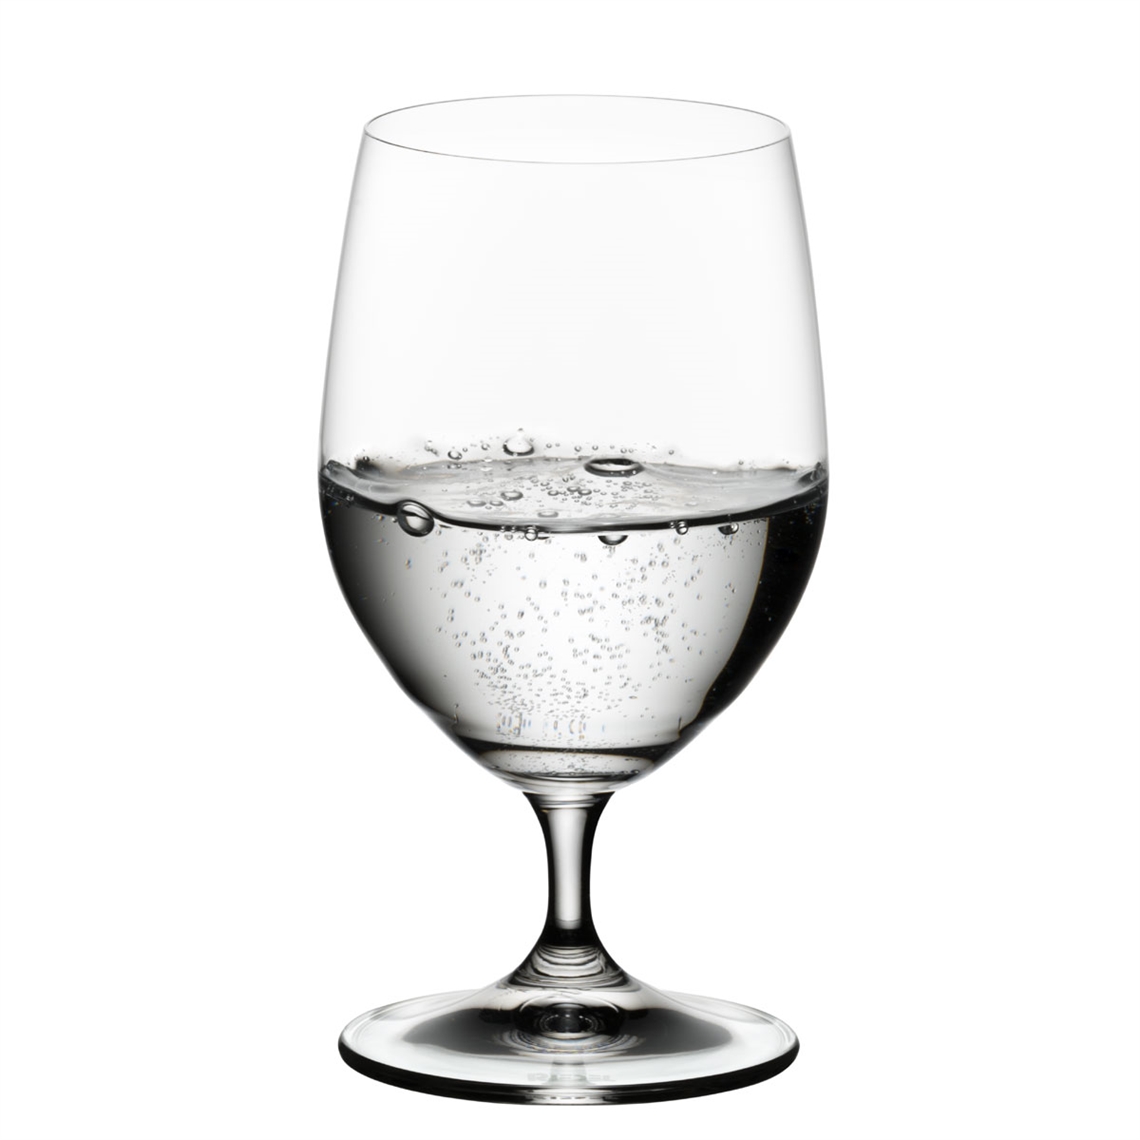 View more long drink & tumblers from our Stemmed Water Glasses range